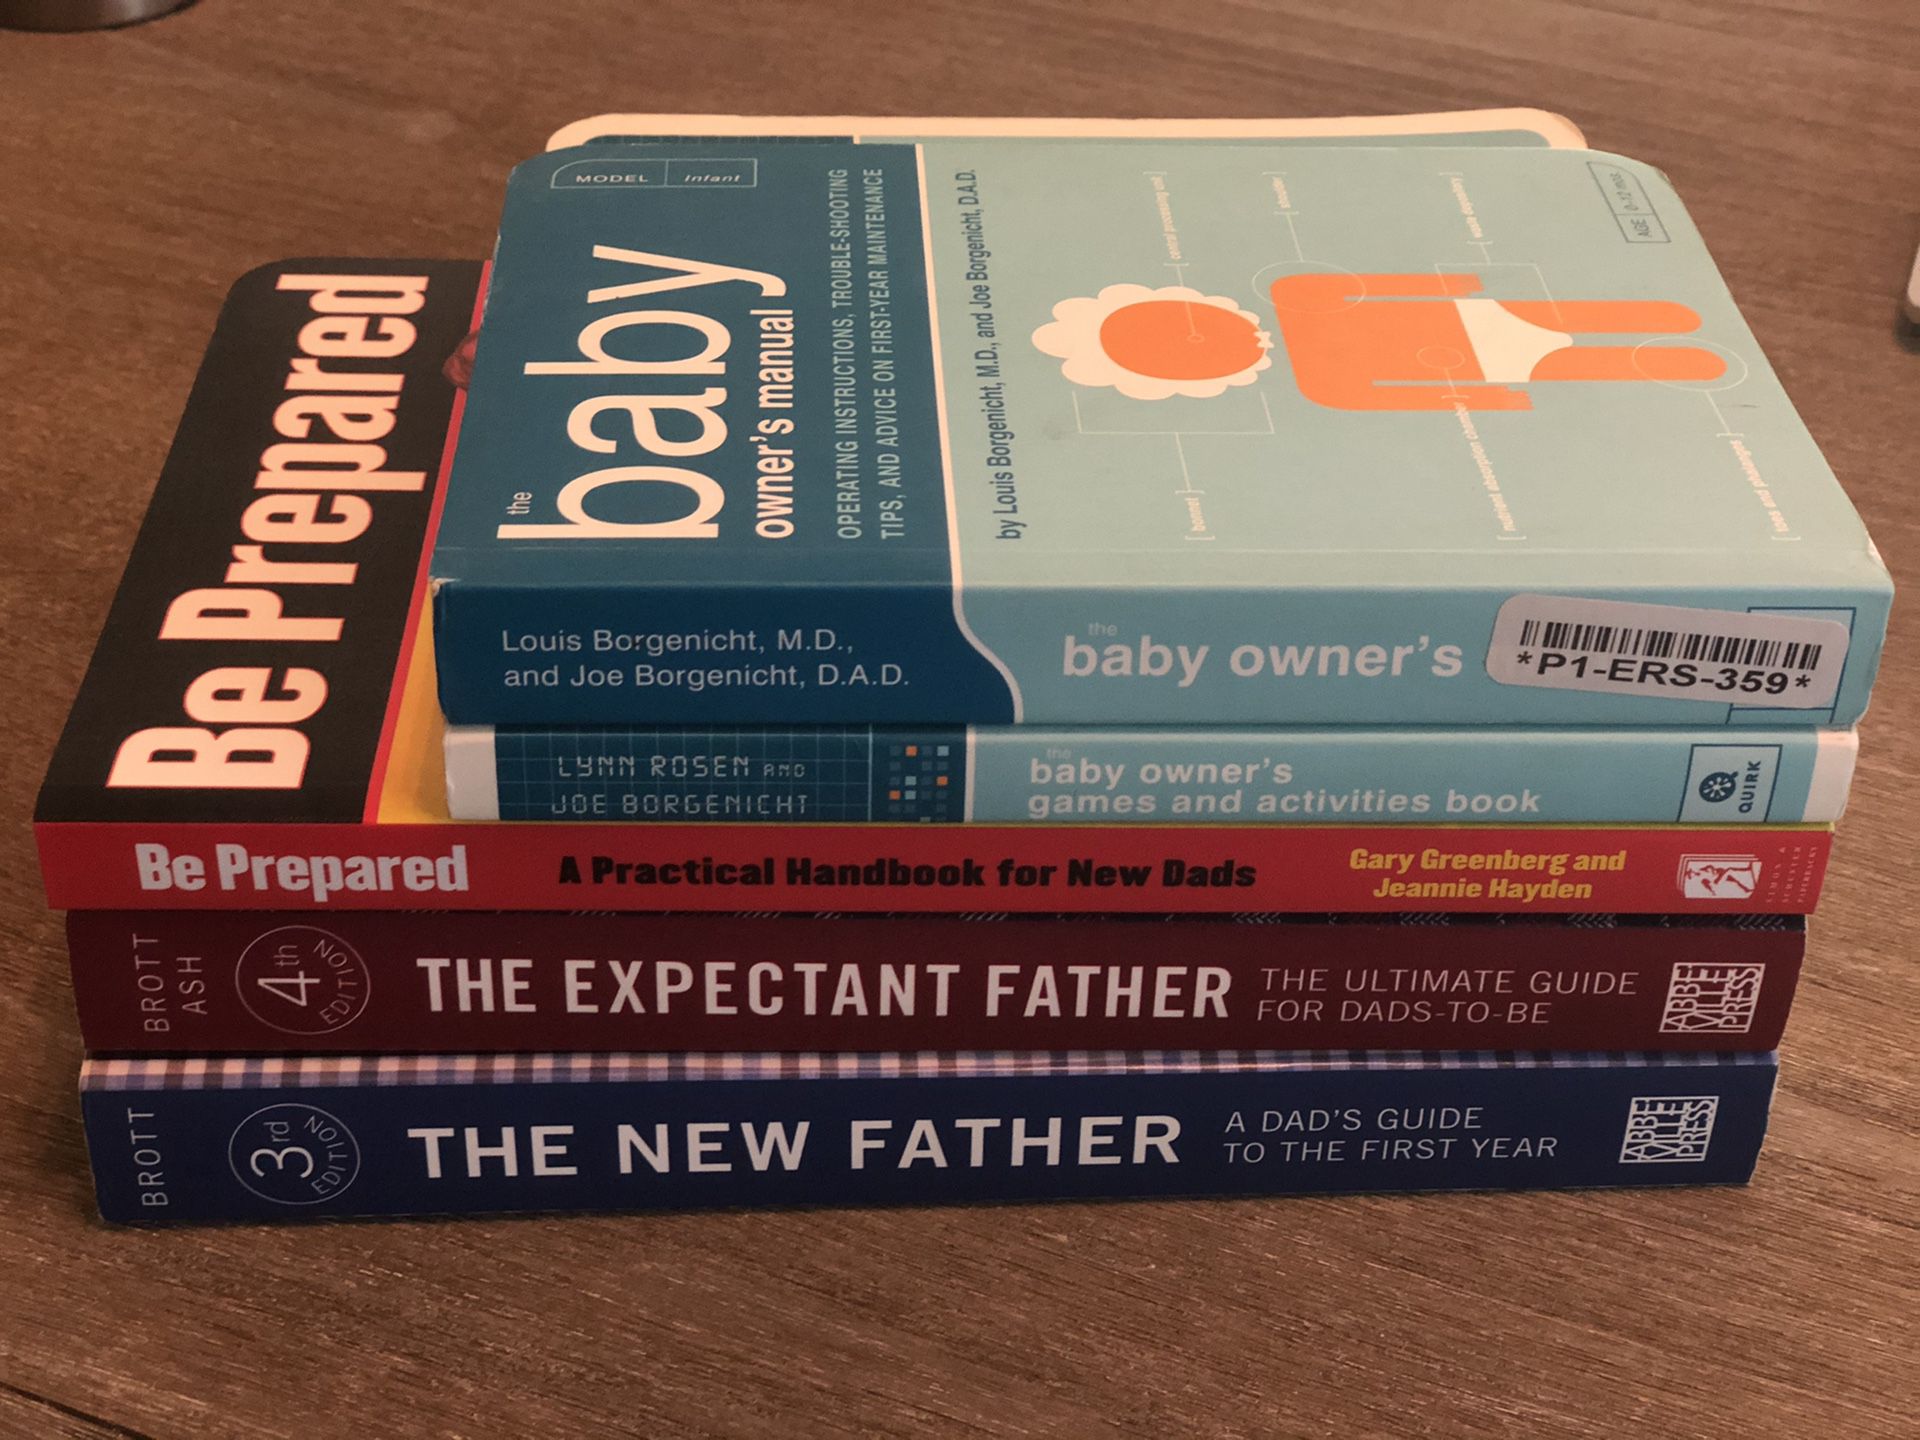 New father books.